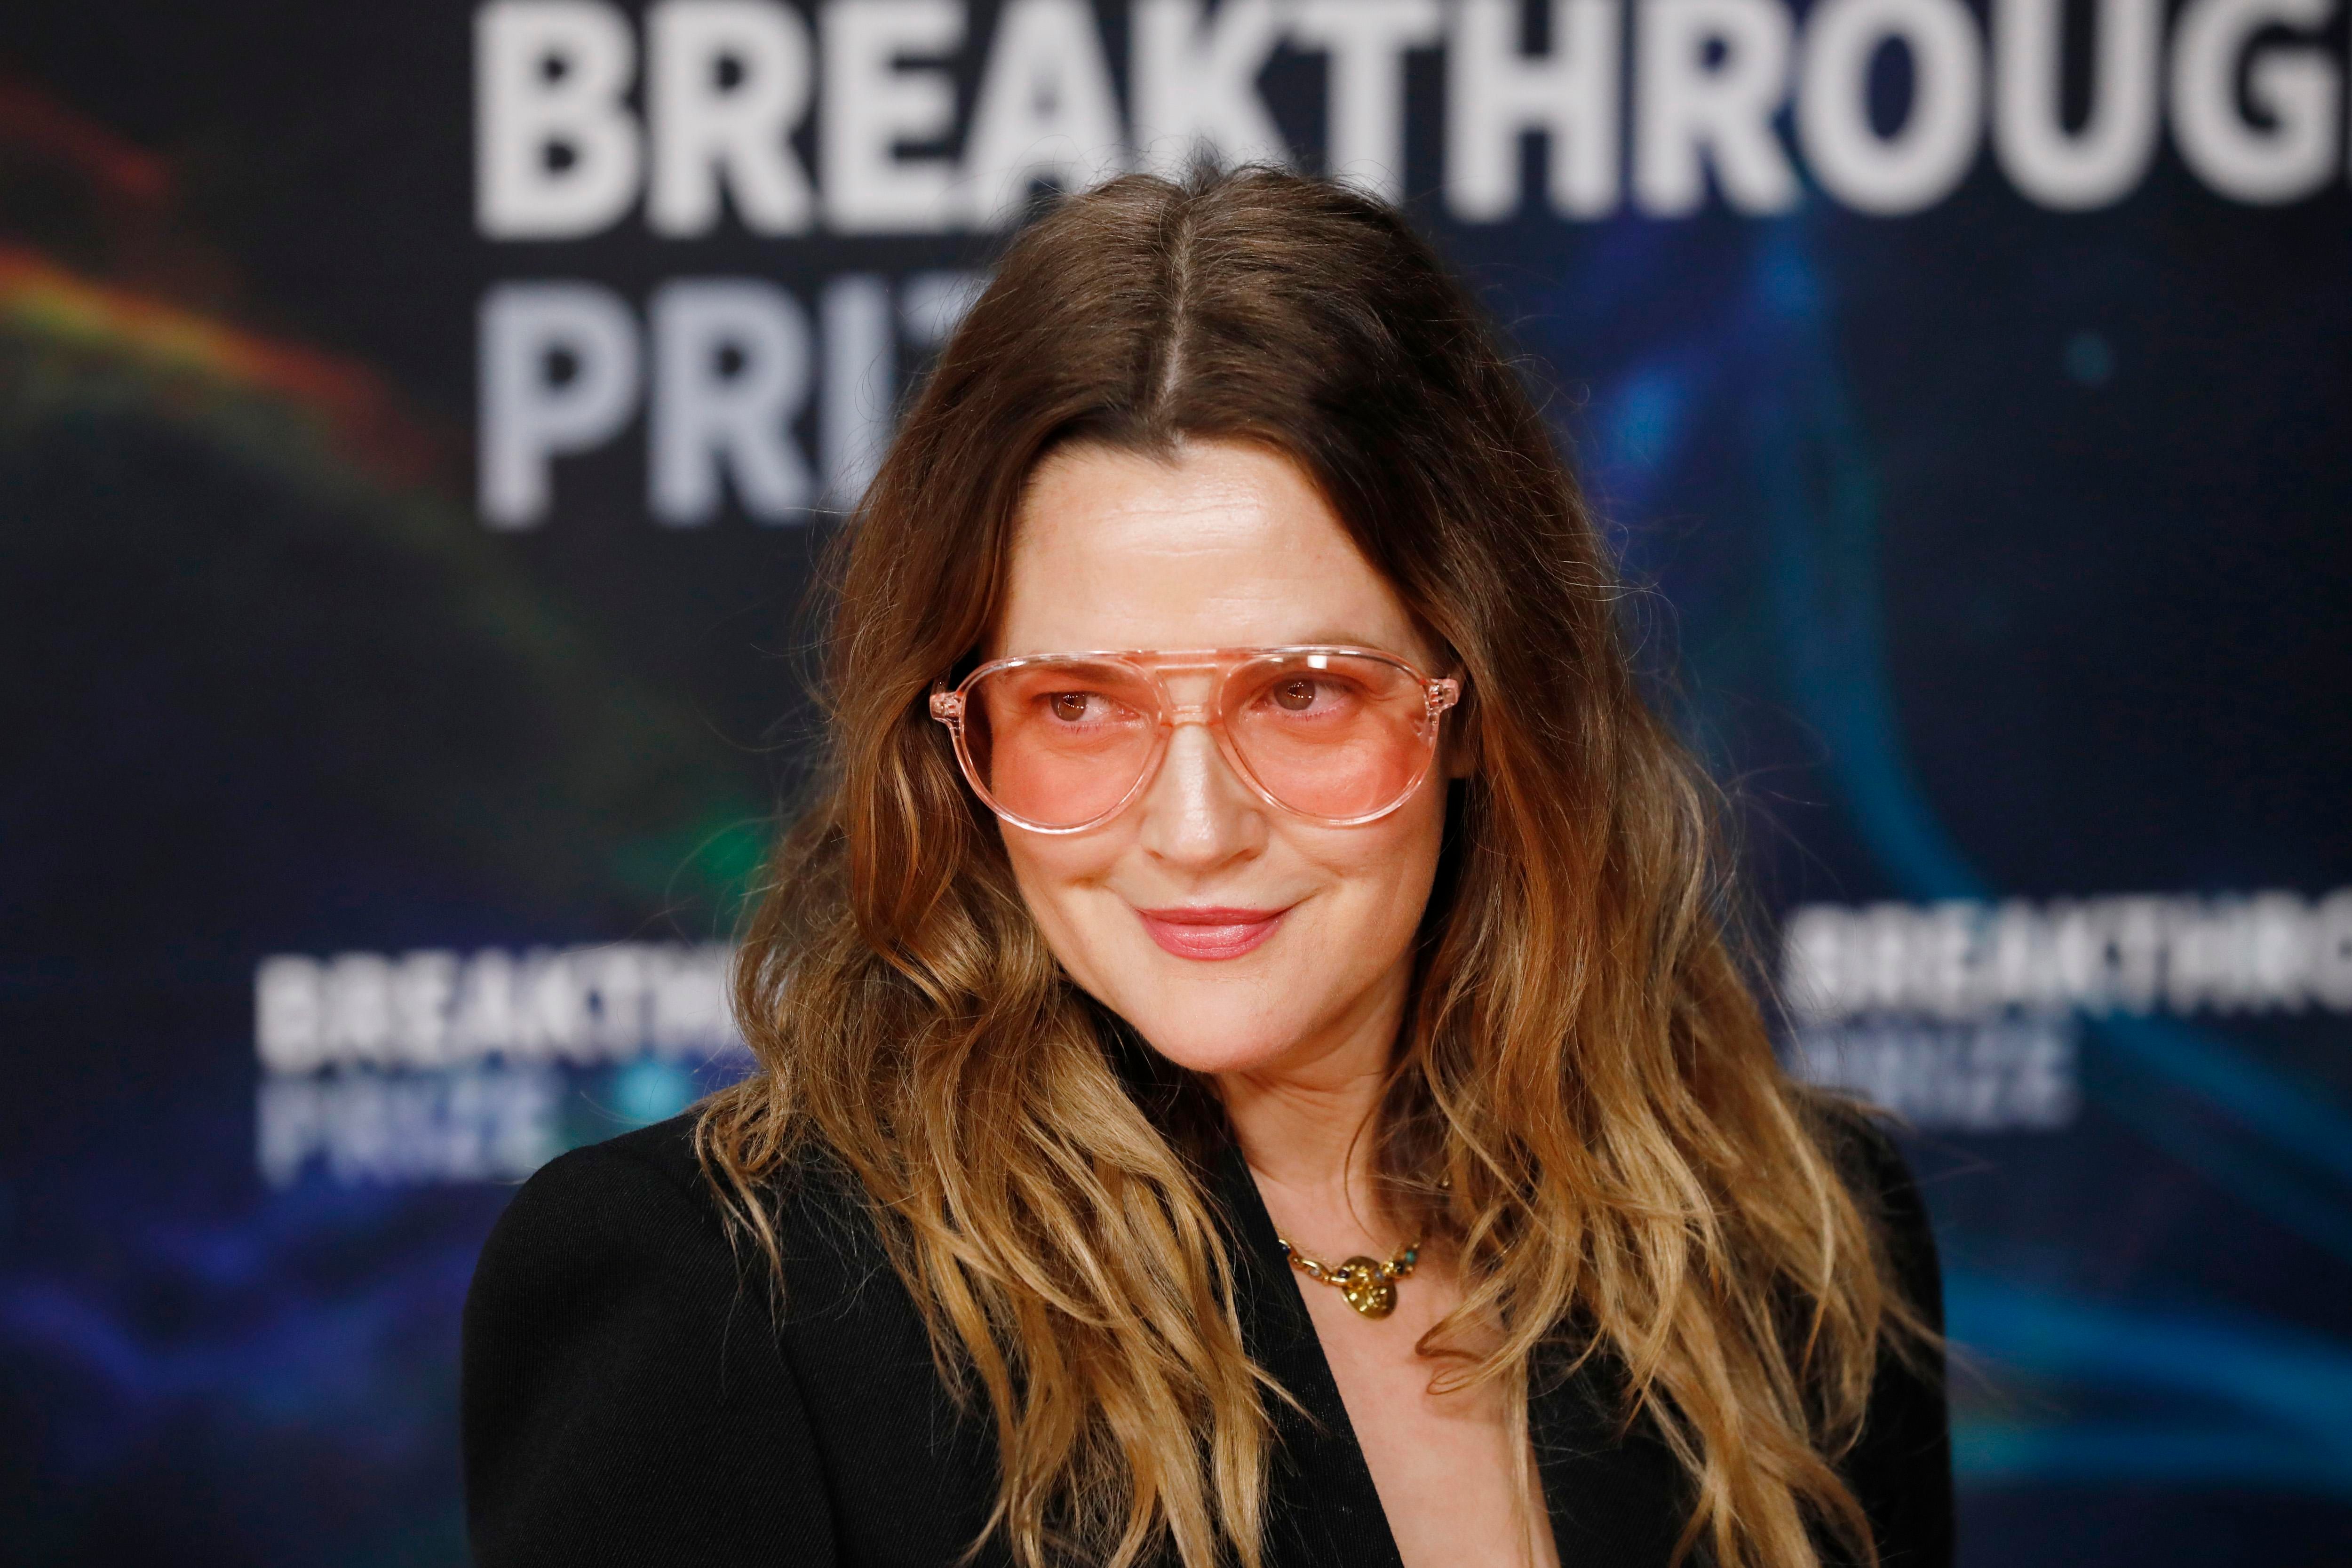 Drew Barrymore at the 2020 Breakthrough Prize Ceremony in California on November 3, 2019 | Photo: Getty Images 